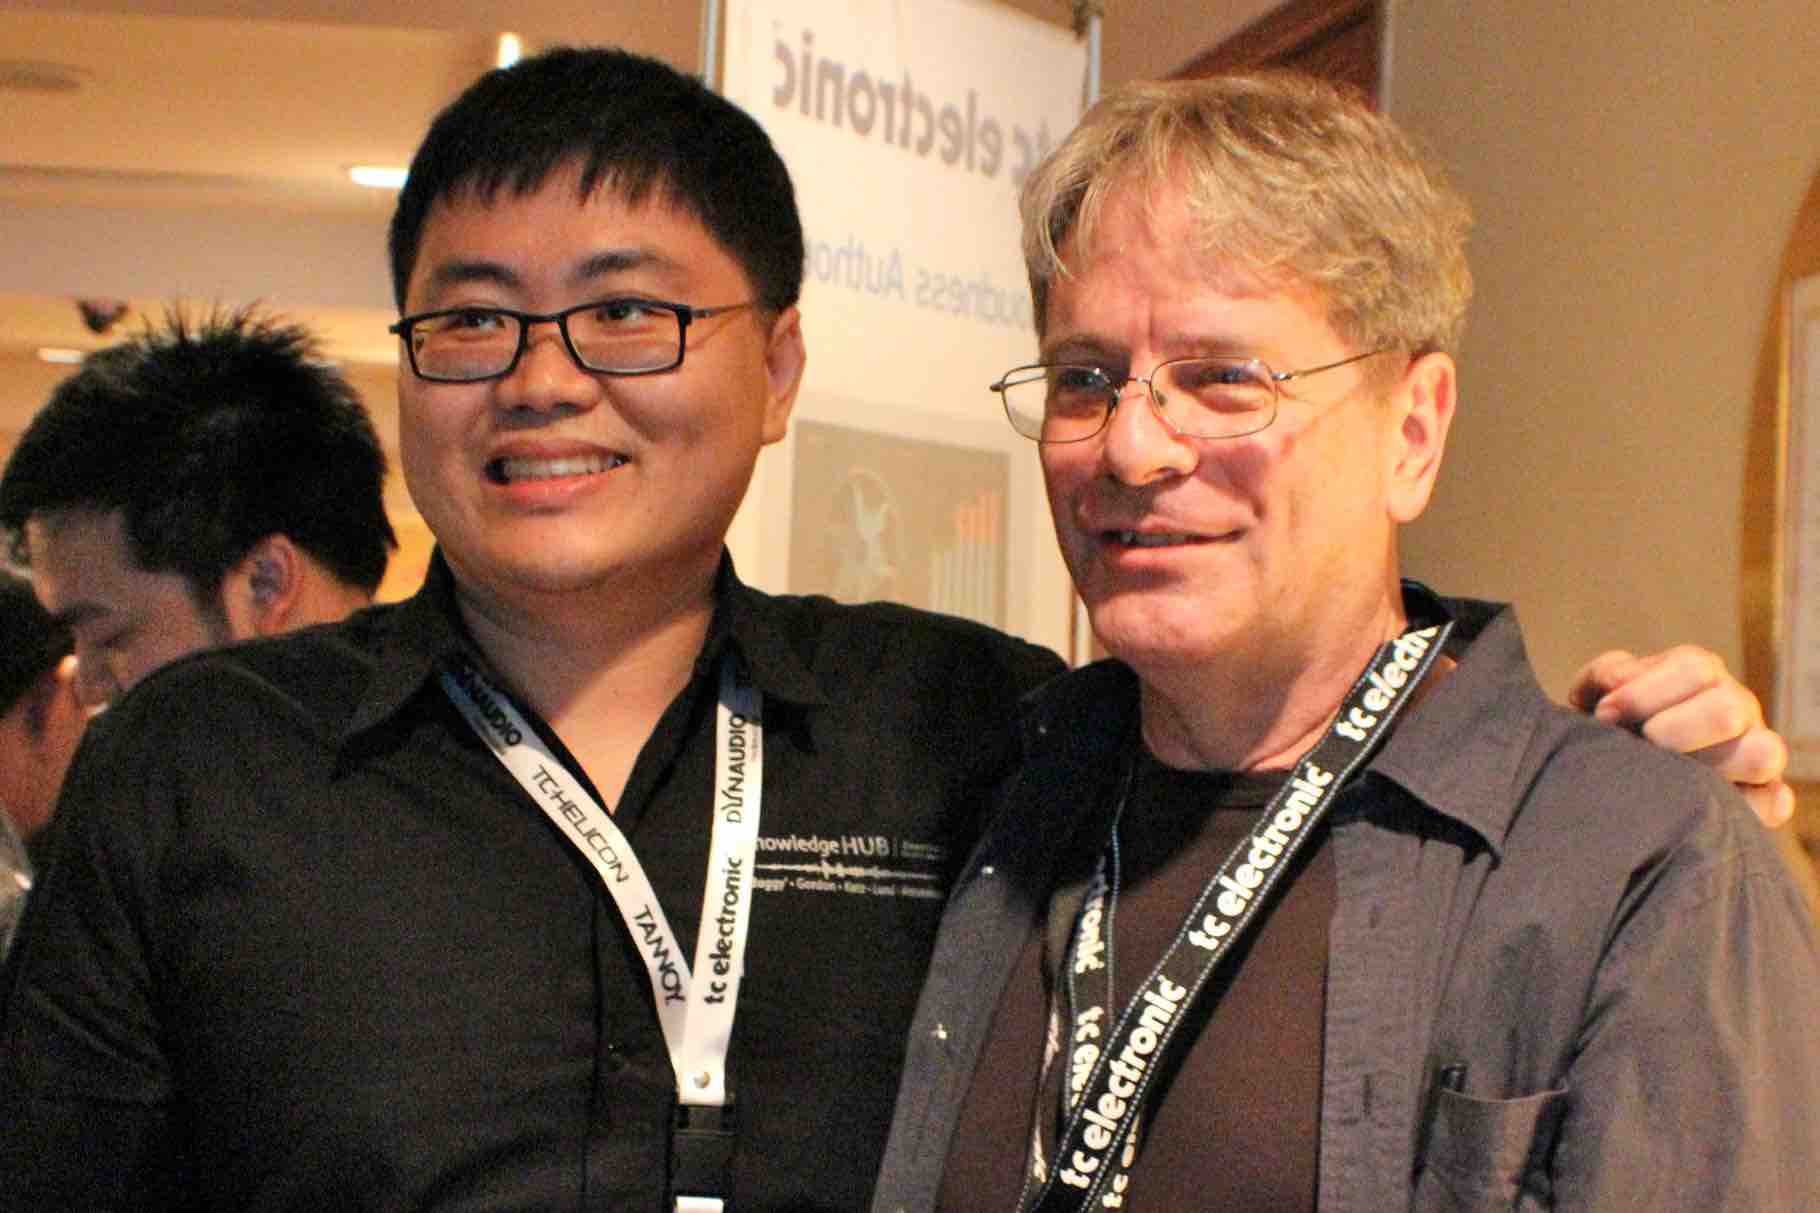 Shawn Chong (left) with George Massenburg (right) Grammy award-winning recording engineer and inventor.